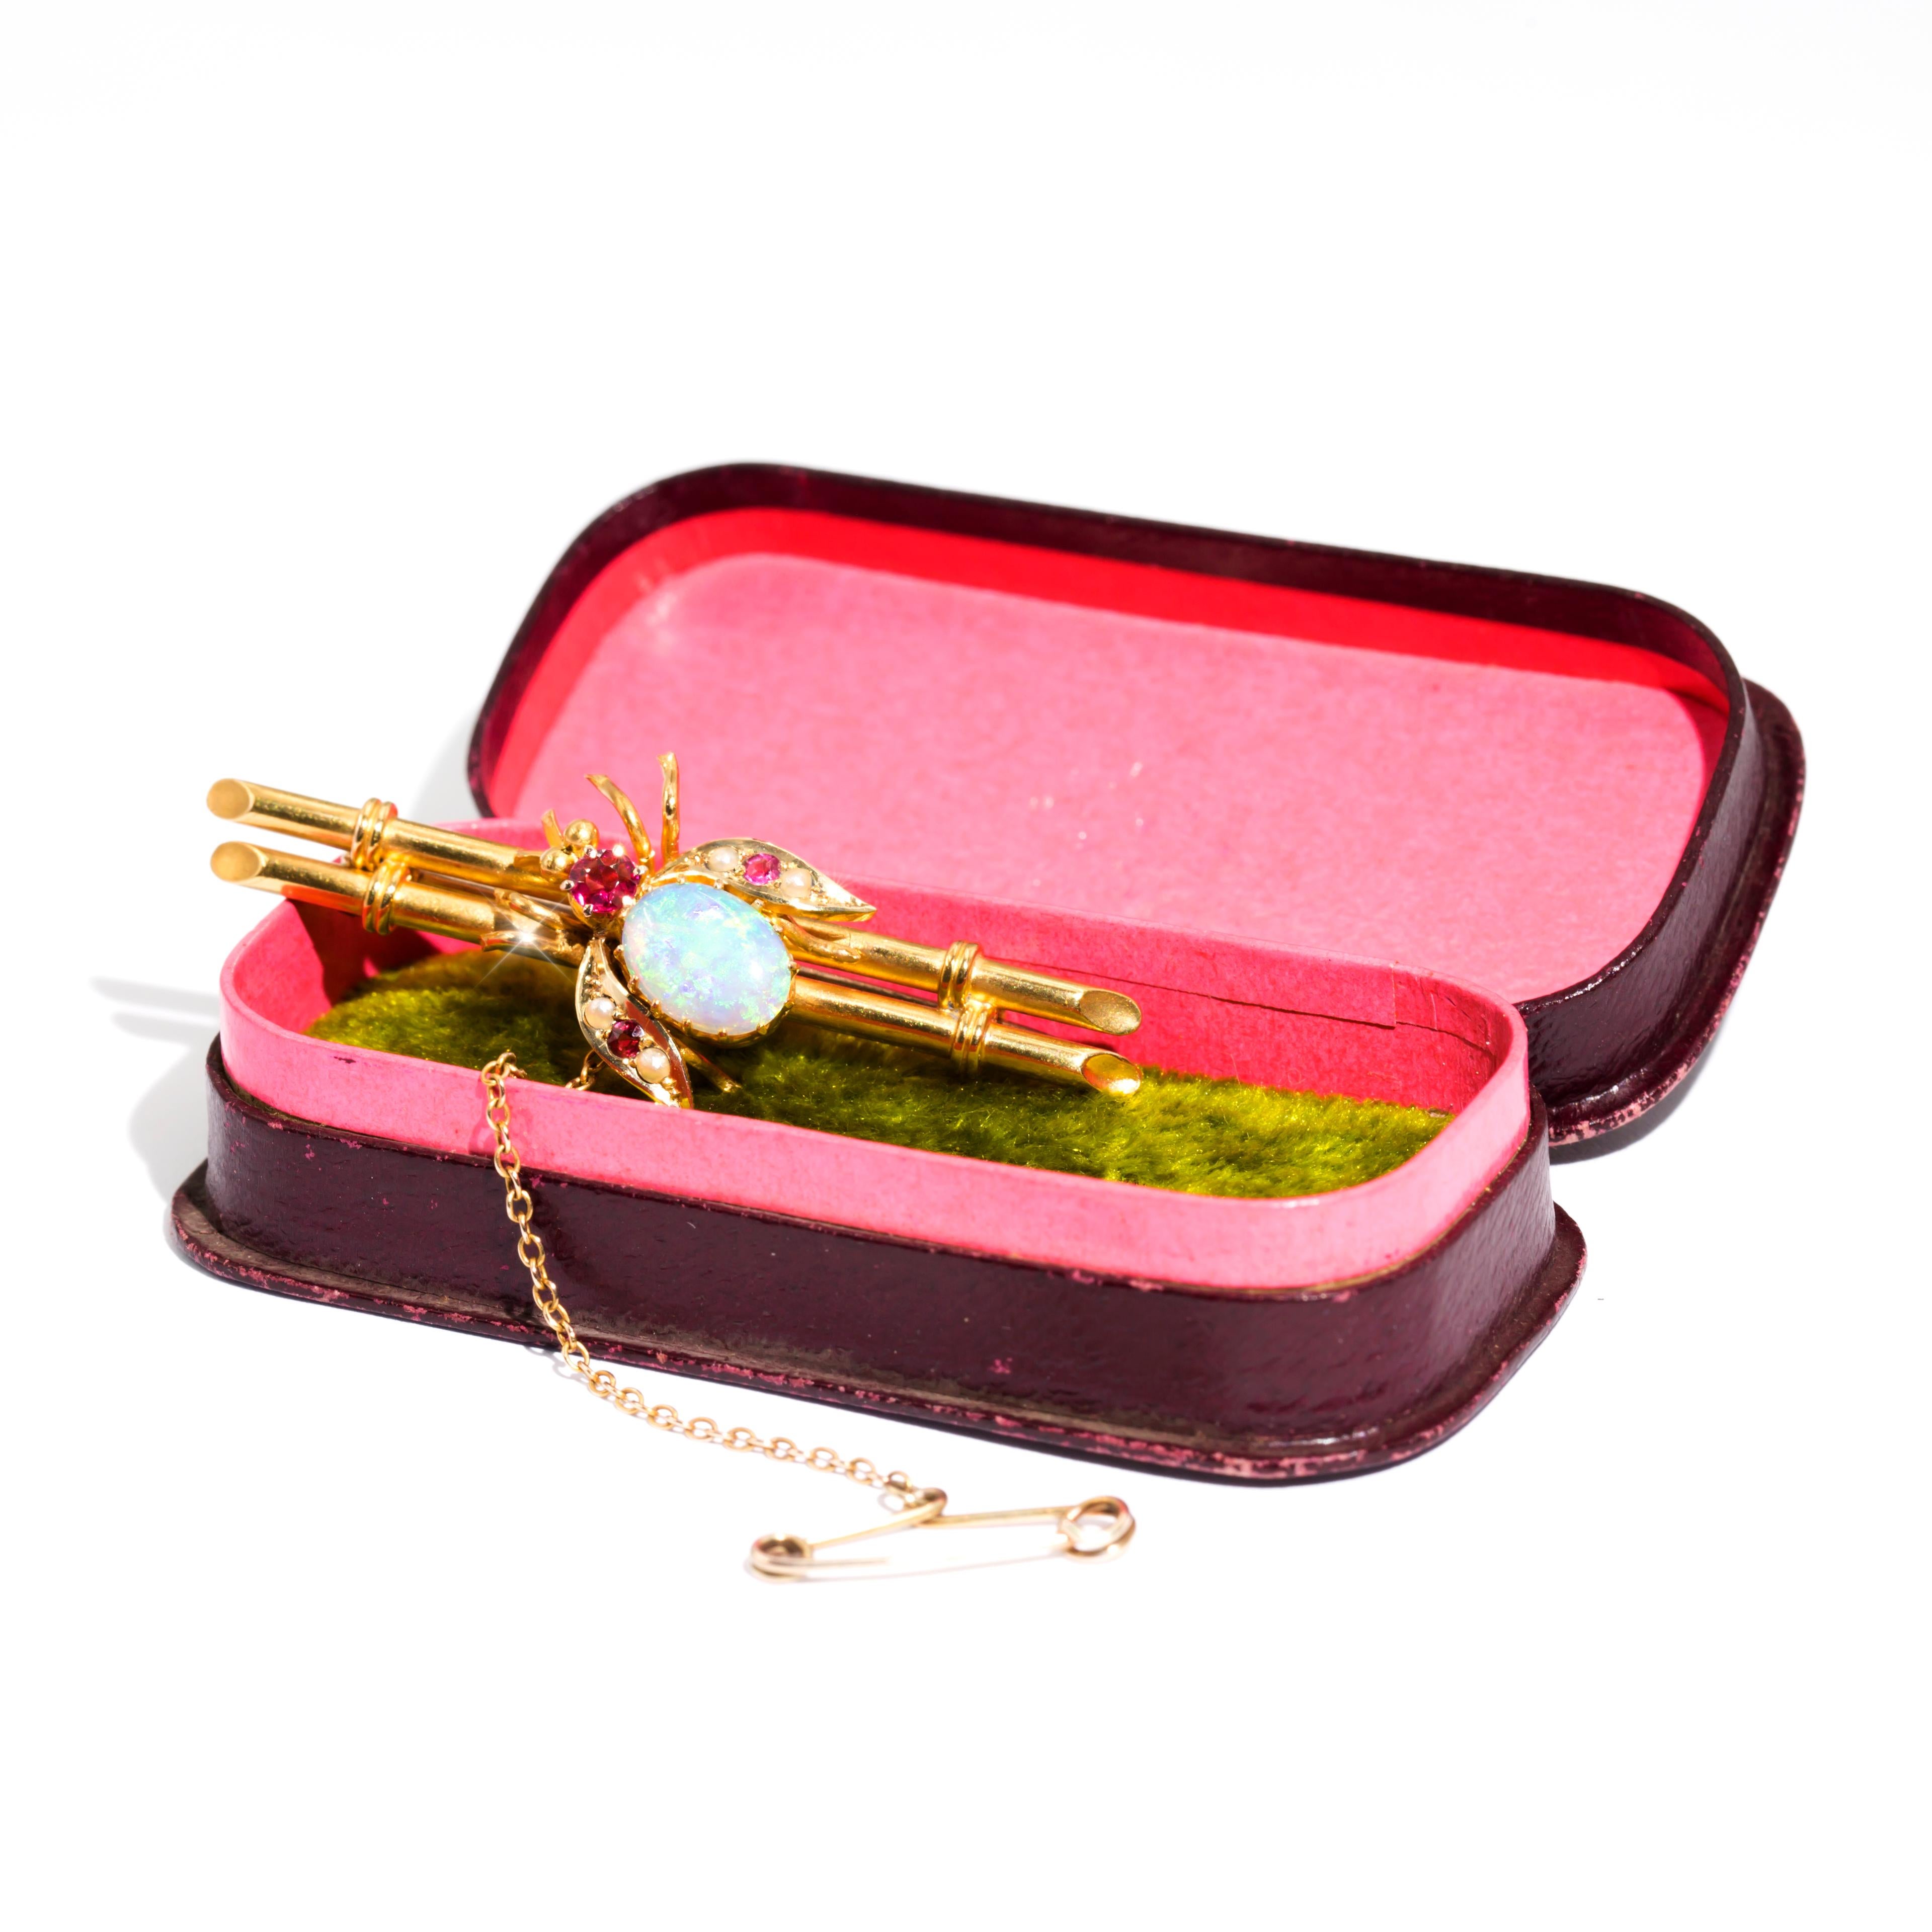 15 Carat Yellow Gold Crystal Opal and Pearl Edwardian Antique Brooch with Box 3